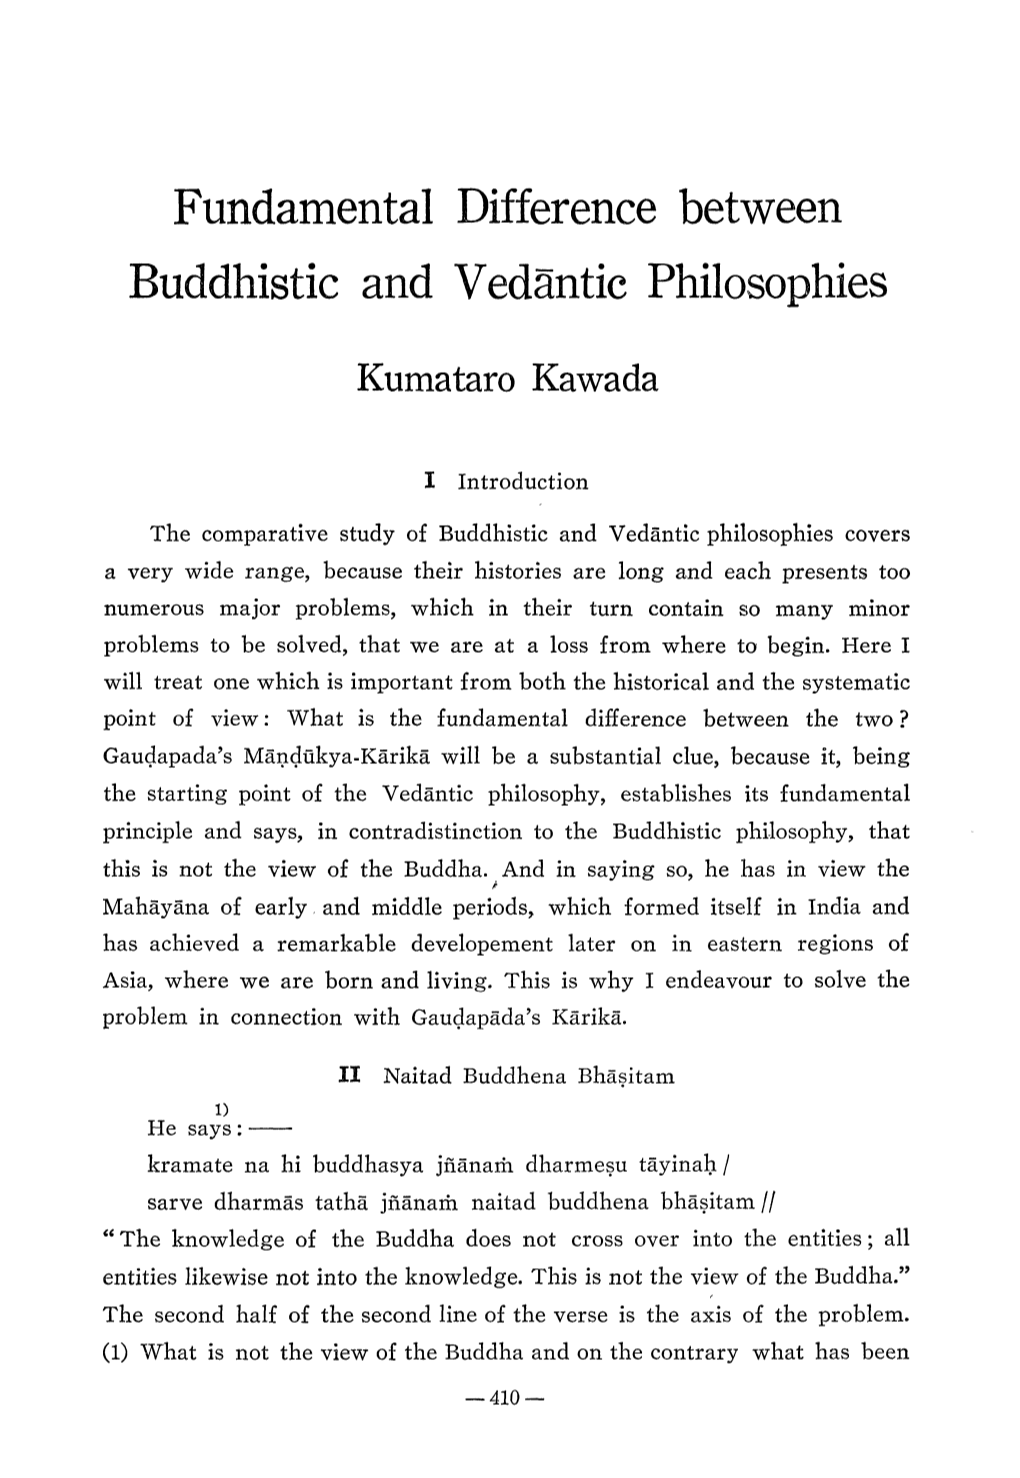 Fundamental Difference Between Buddhistic and Vedantic Philosophies